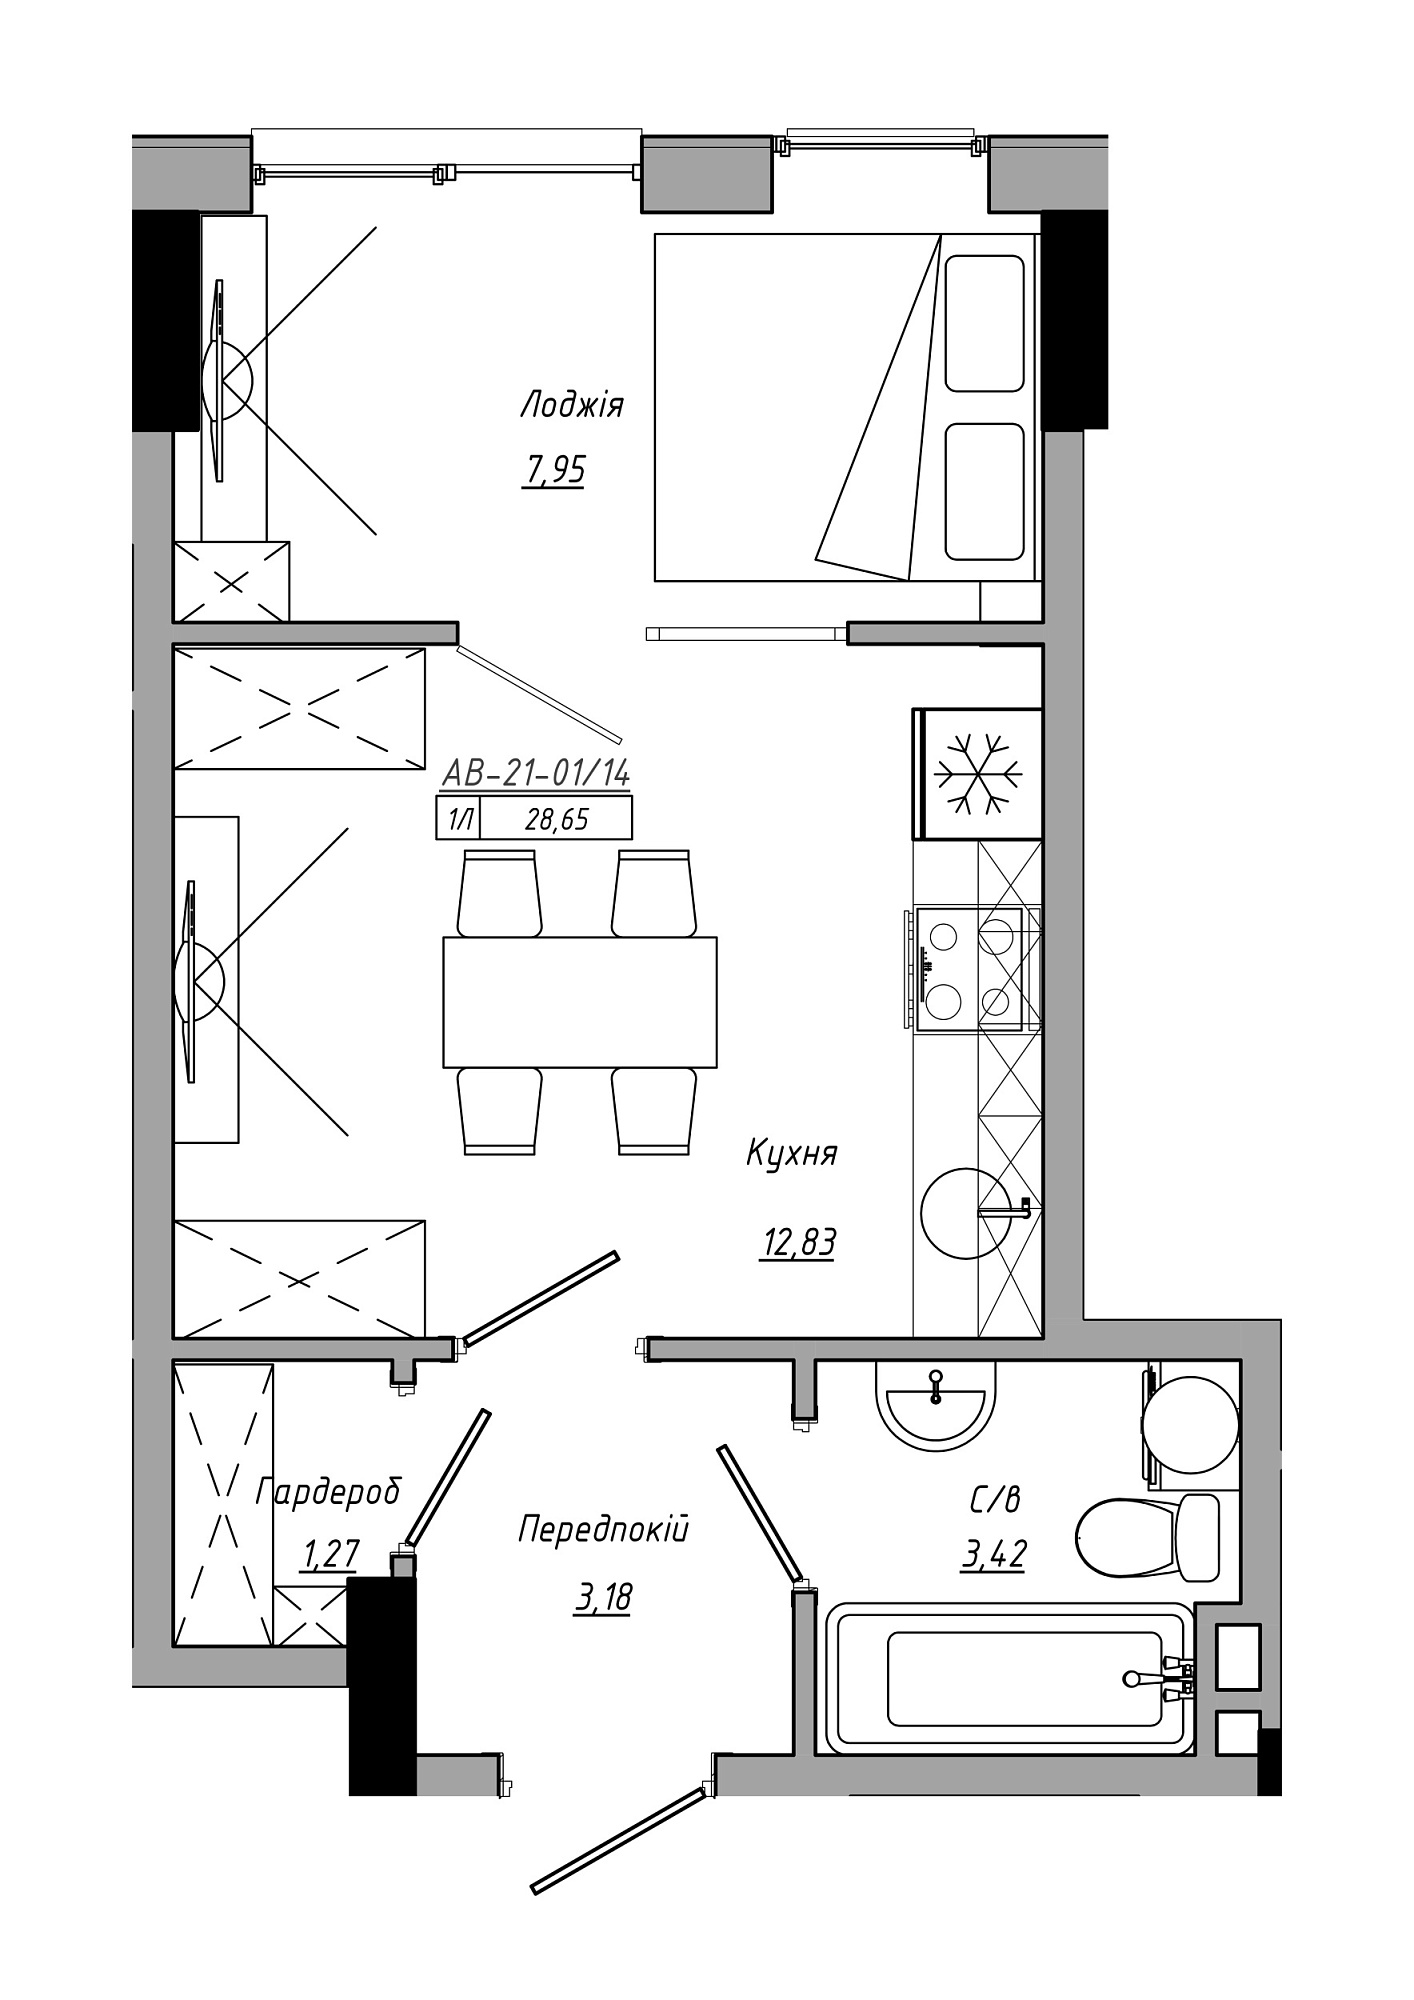 Planning 1-rm flats area 28.65m2, AB-21-01/00014.